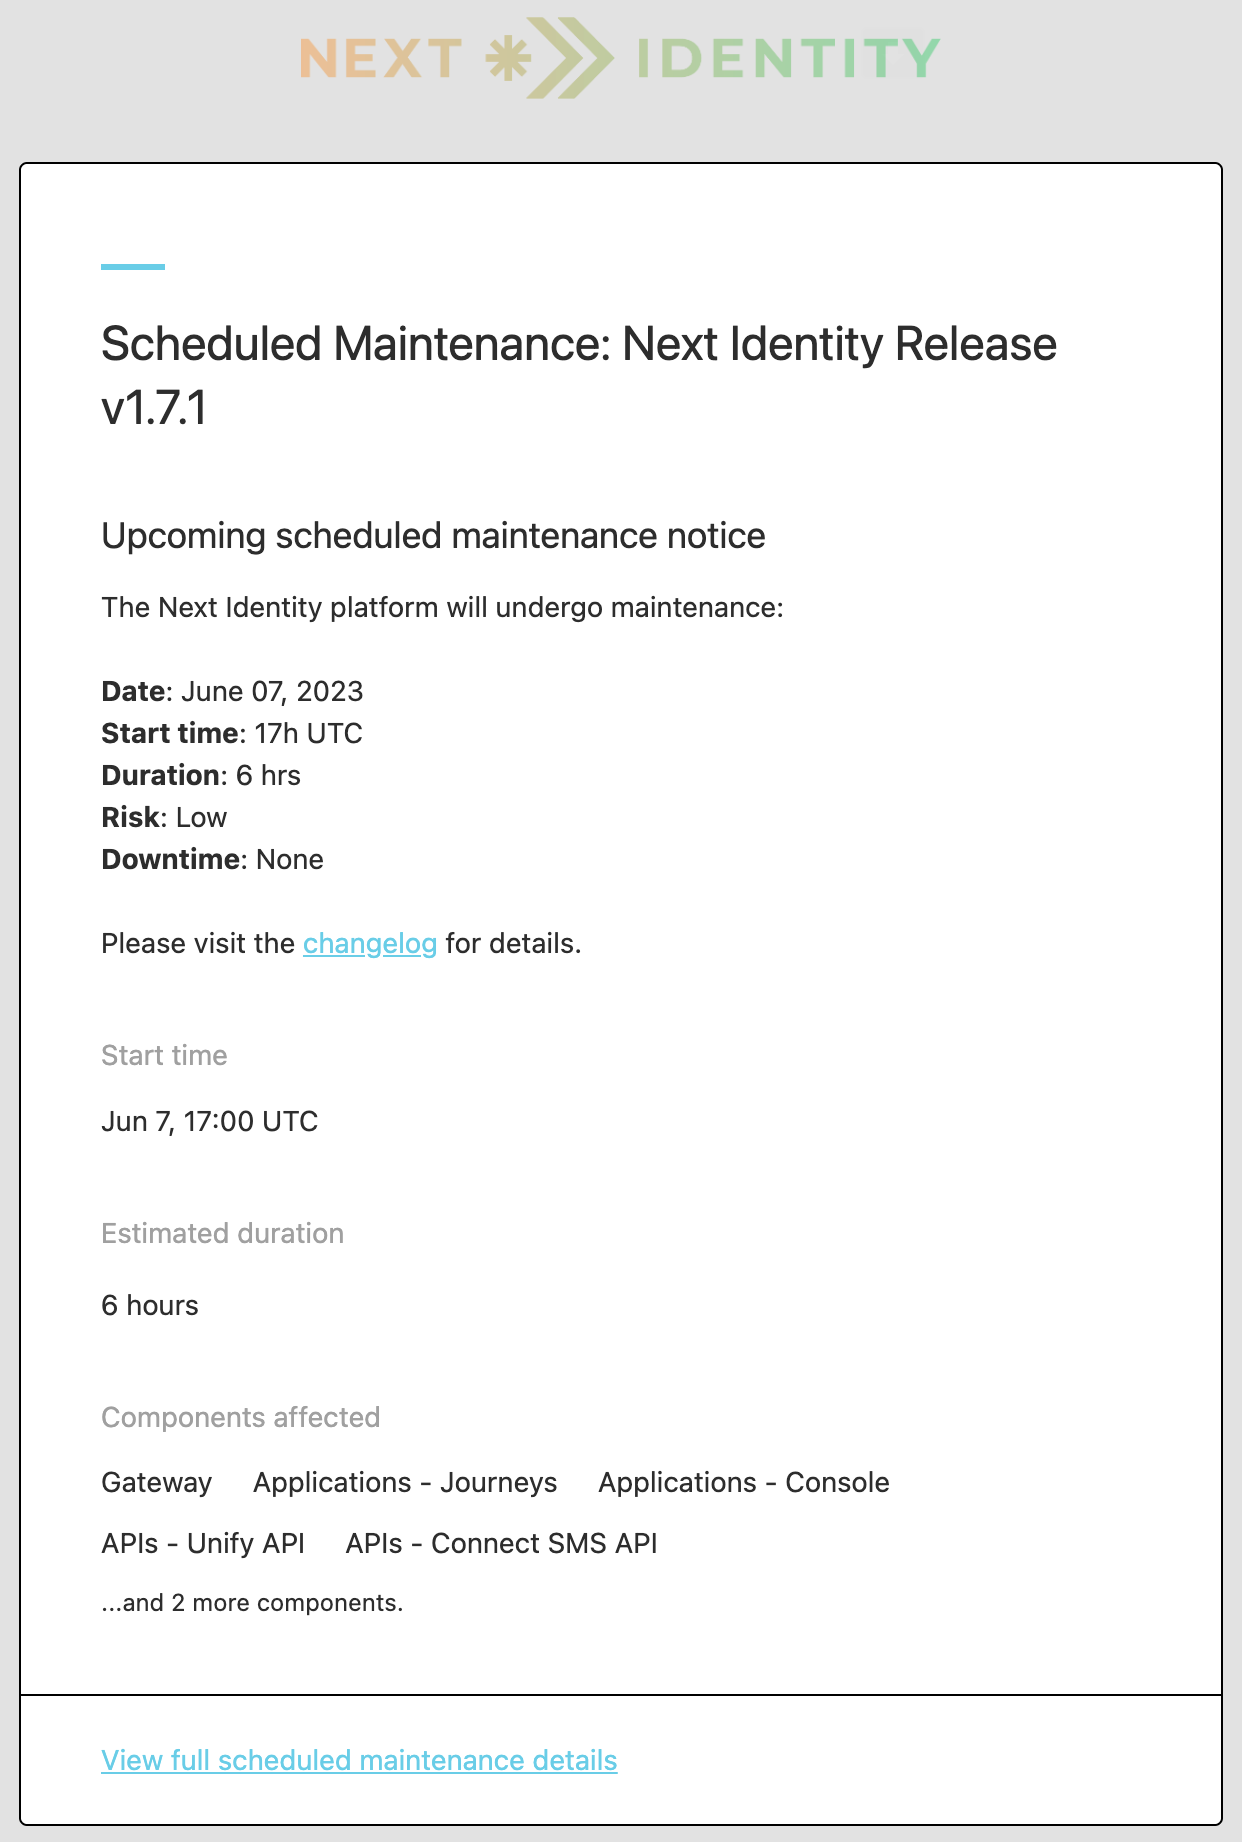 An example of a Scheduled Maintenance alert email notification for the Next Identity Platform.